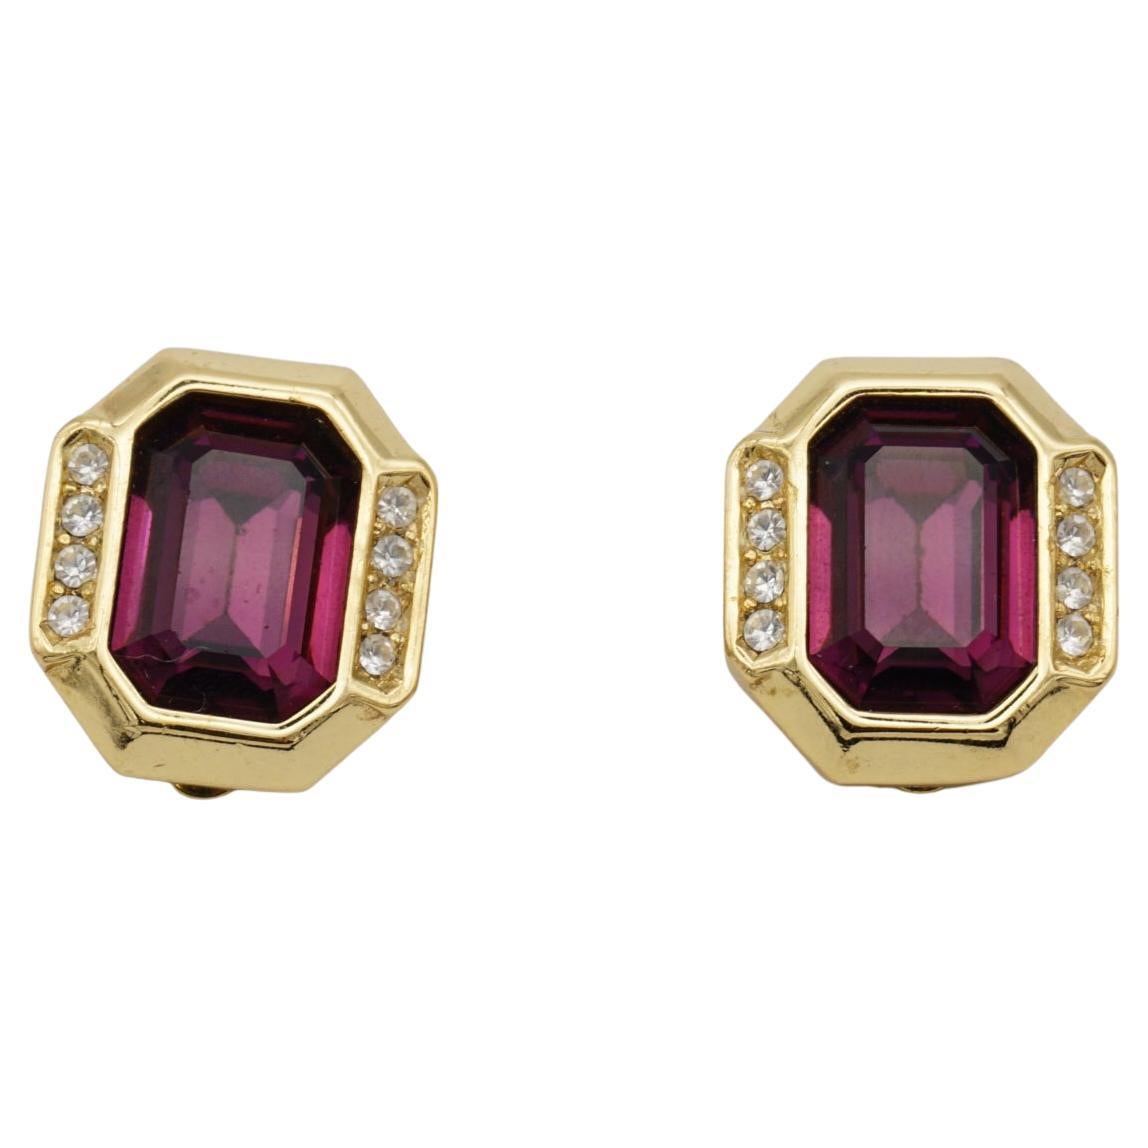 Christian Dior Vintage 1980s Amethyst Purple Crystals Octagonal Clip Earrings For Sale